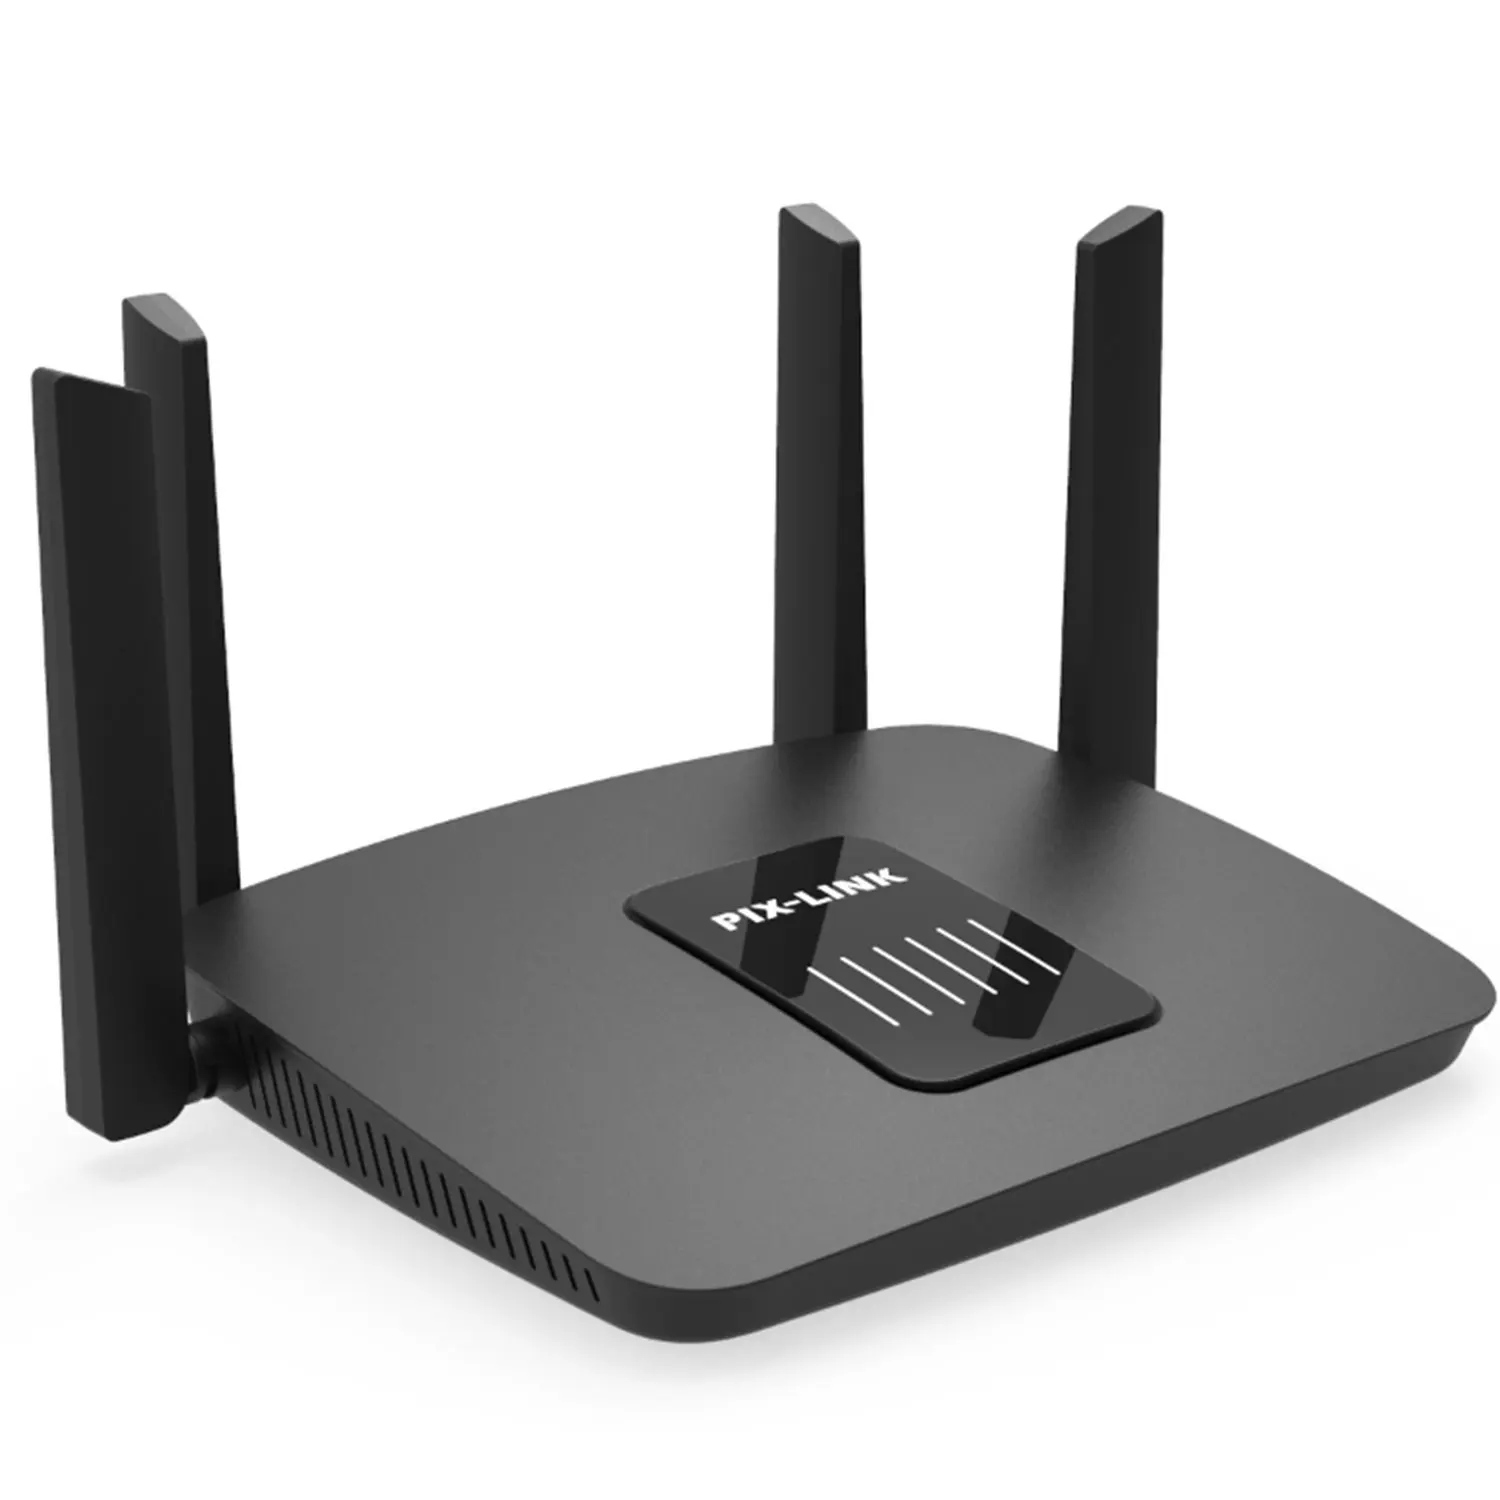 

Hot Selling High quality PIX-LINK 1200Mbps Wireless-AC Dual Band Router AC06 WIFI router, Black